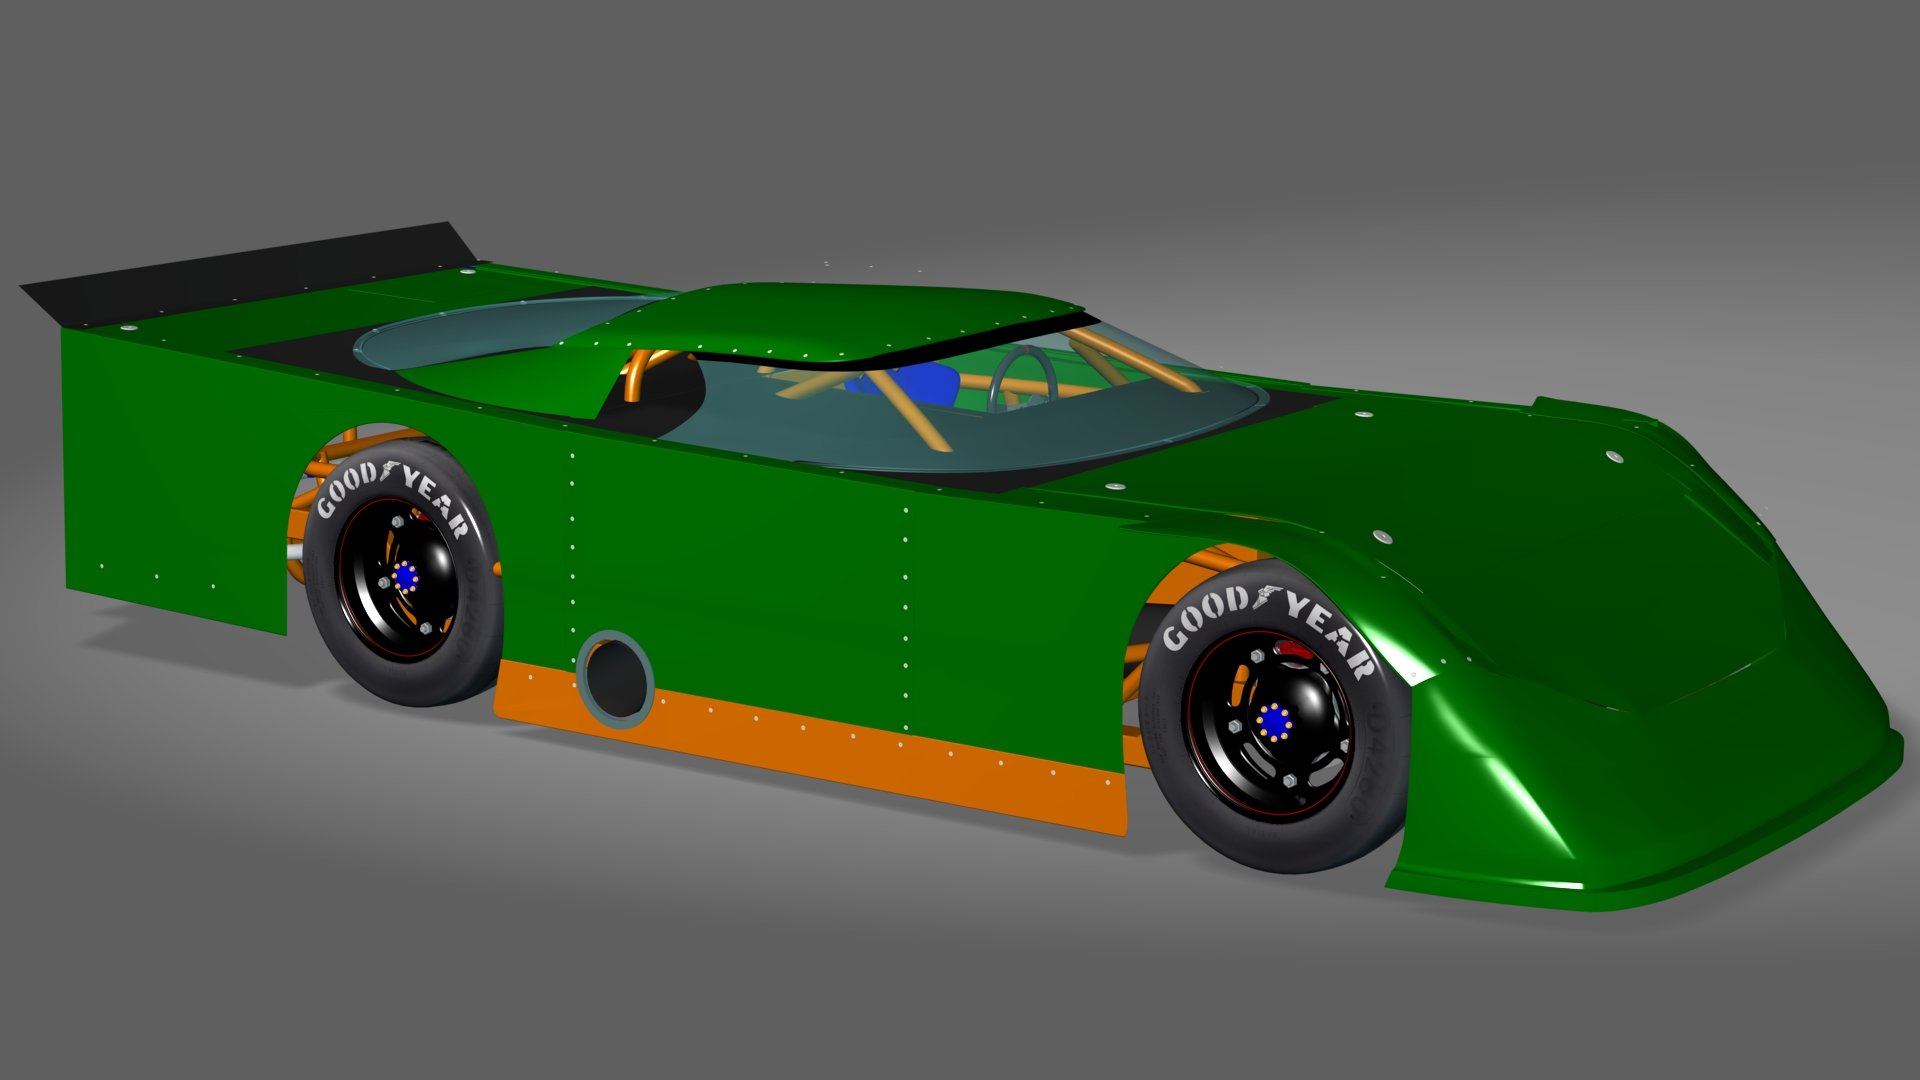 still working on this model green no decal0.jpg